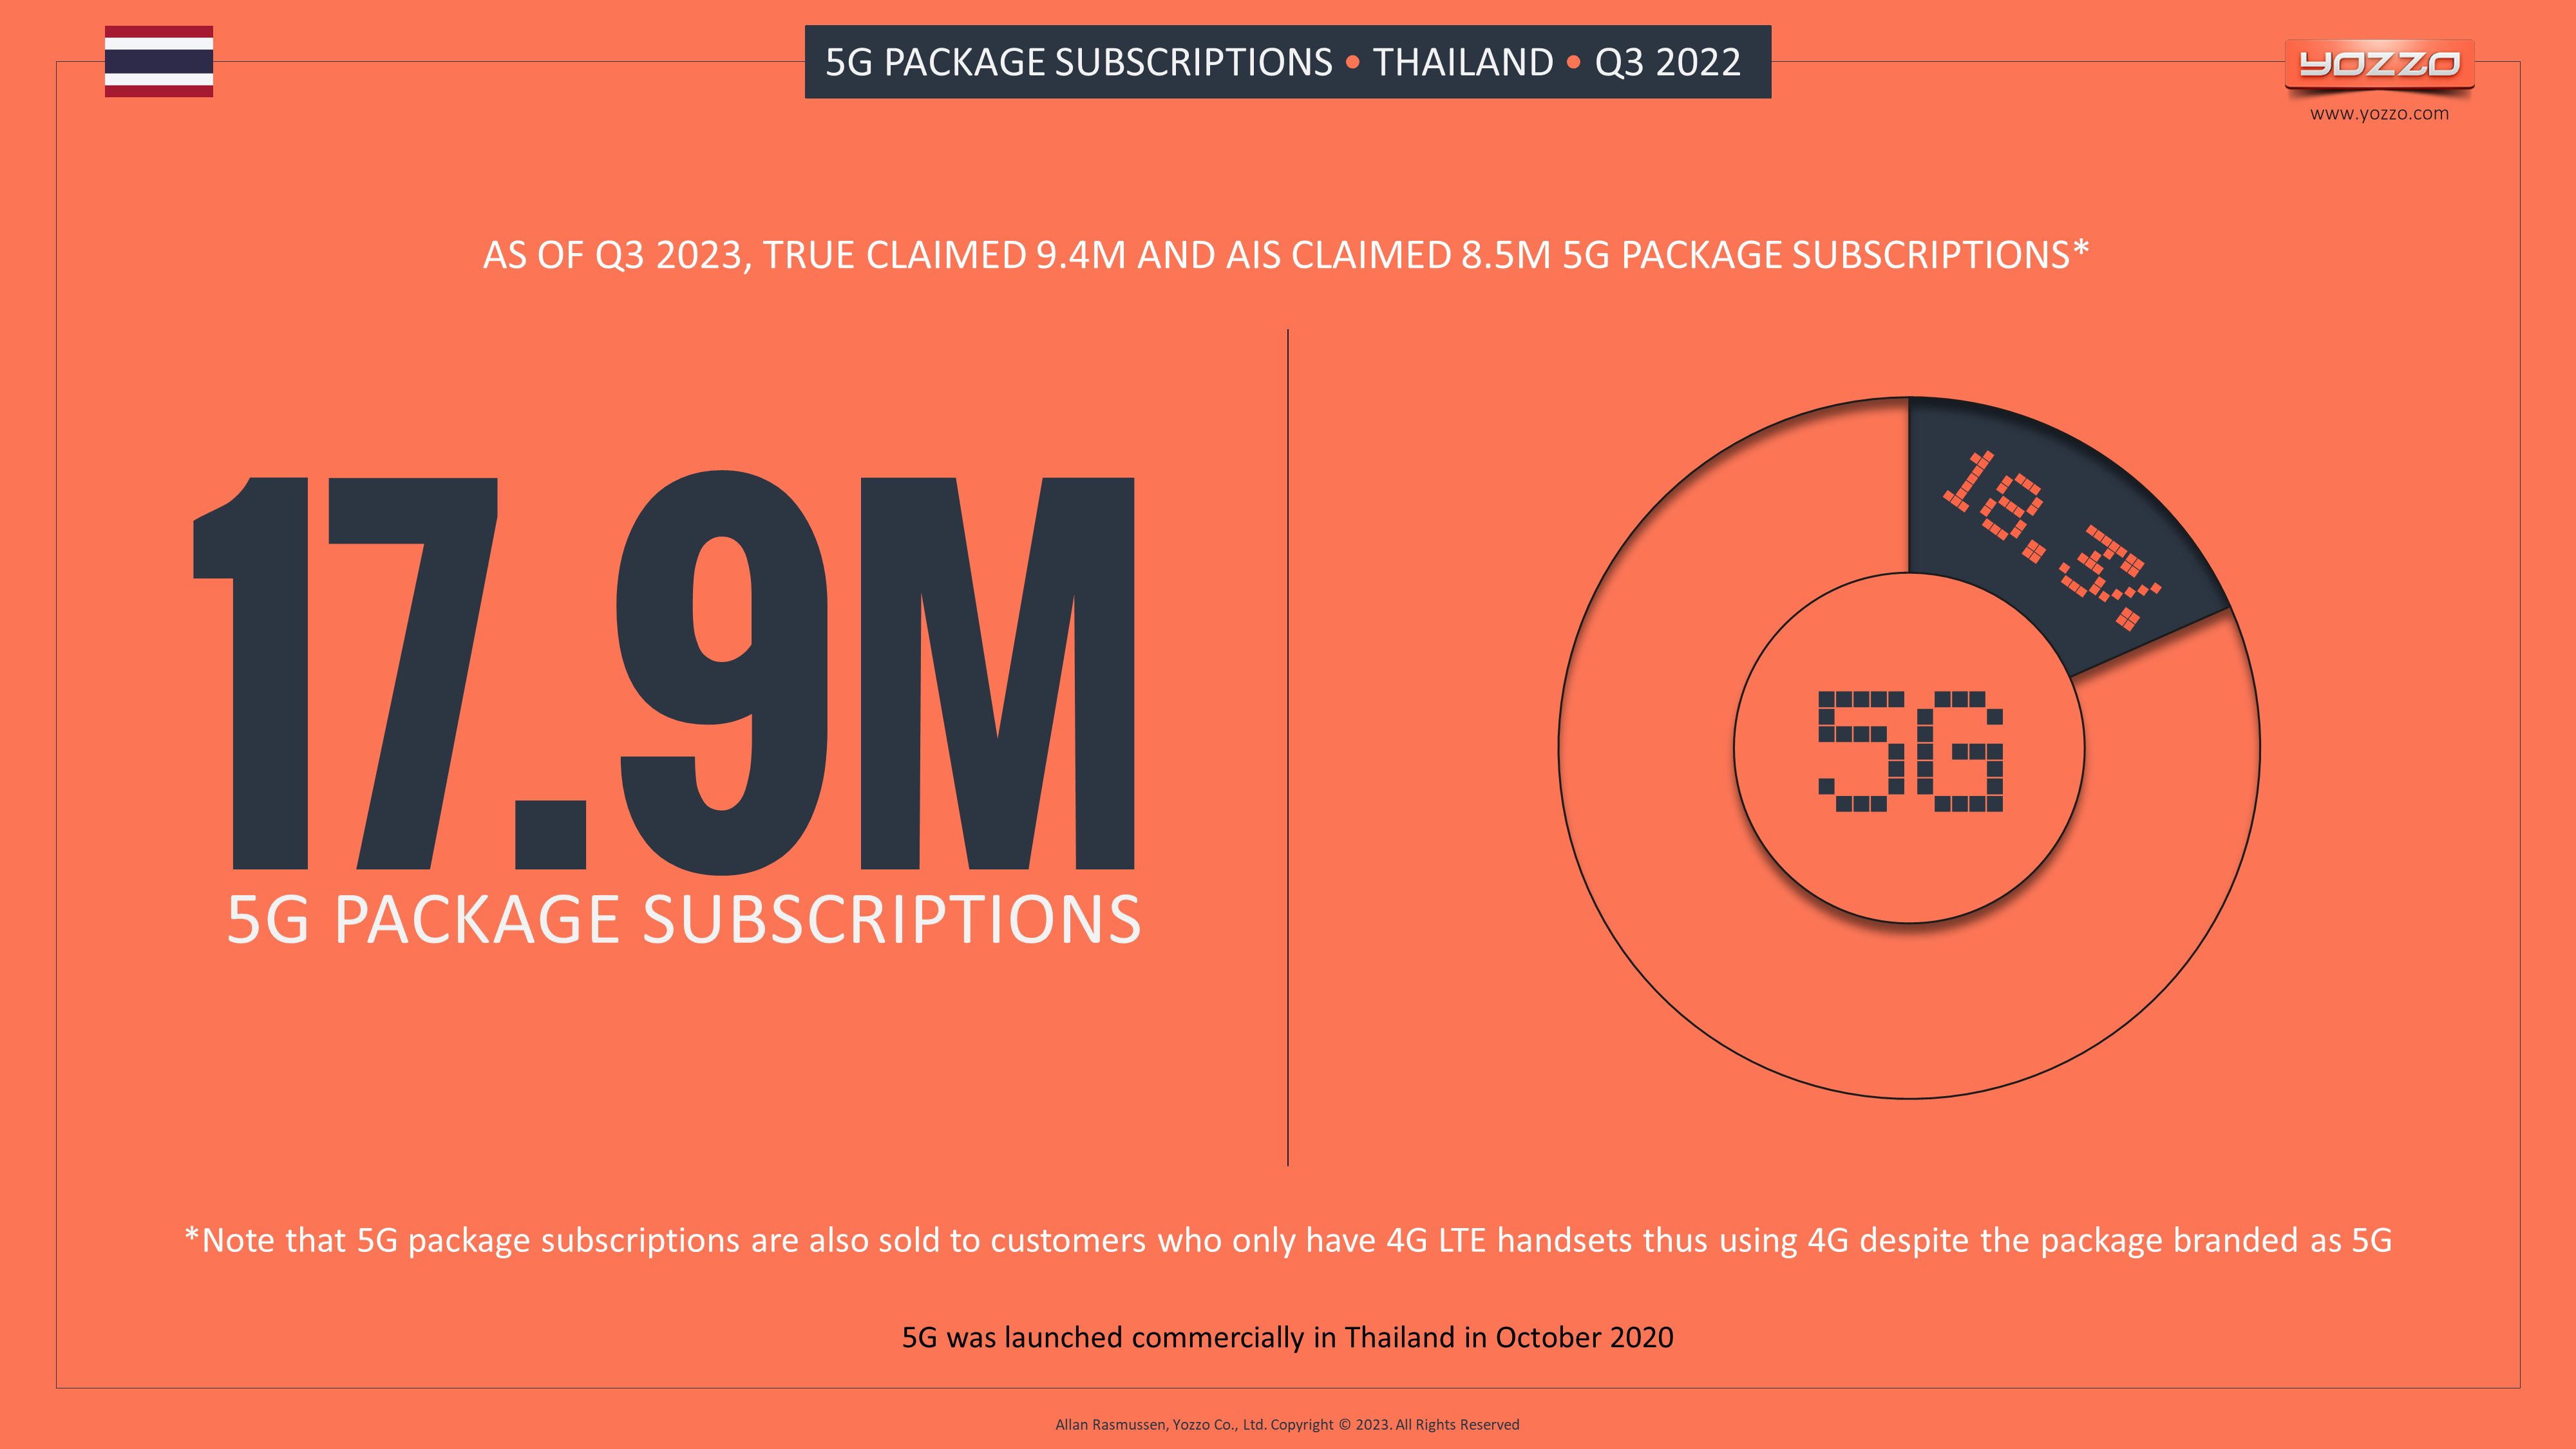 5G Package Subscriptions Thailand Q3 2022